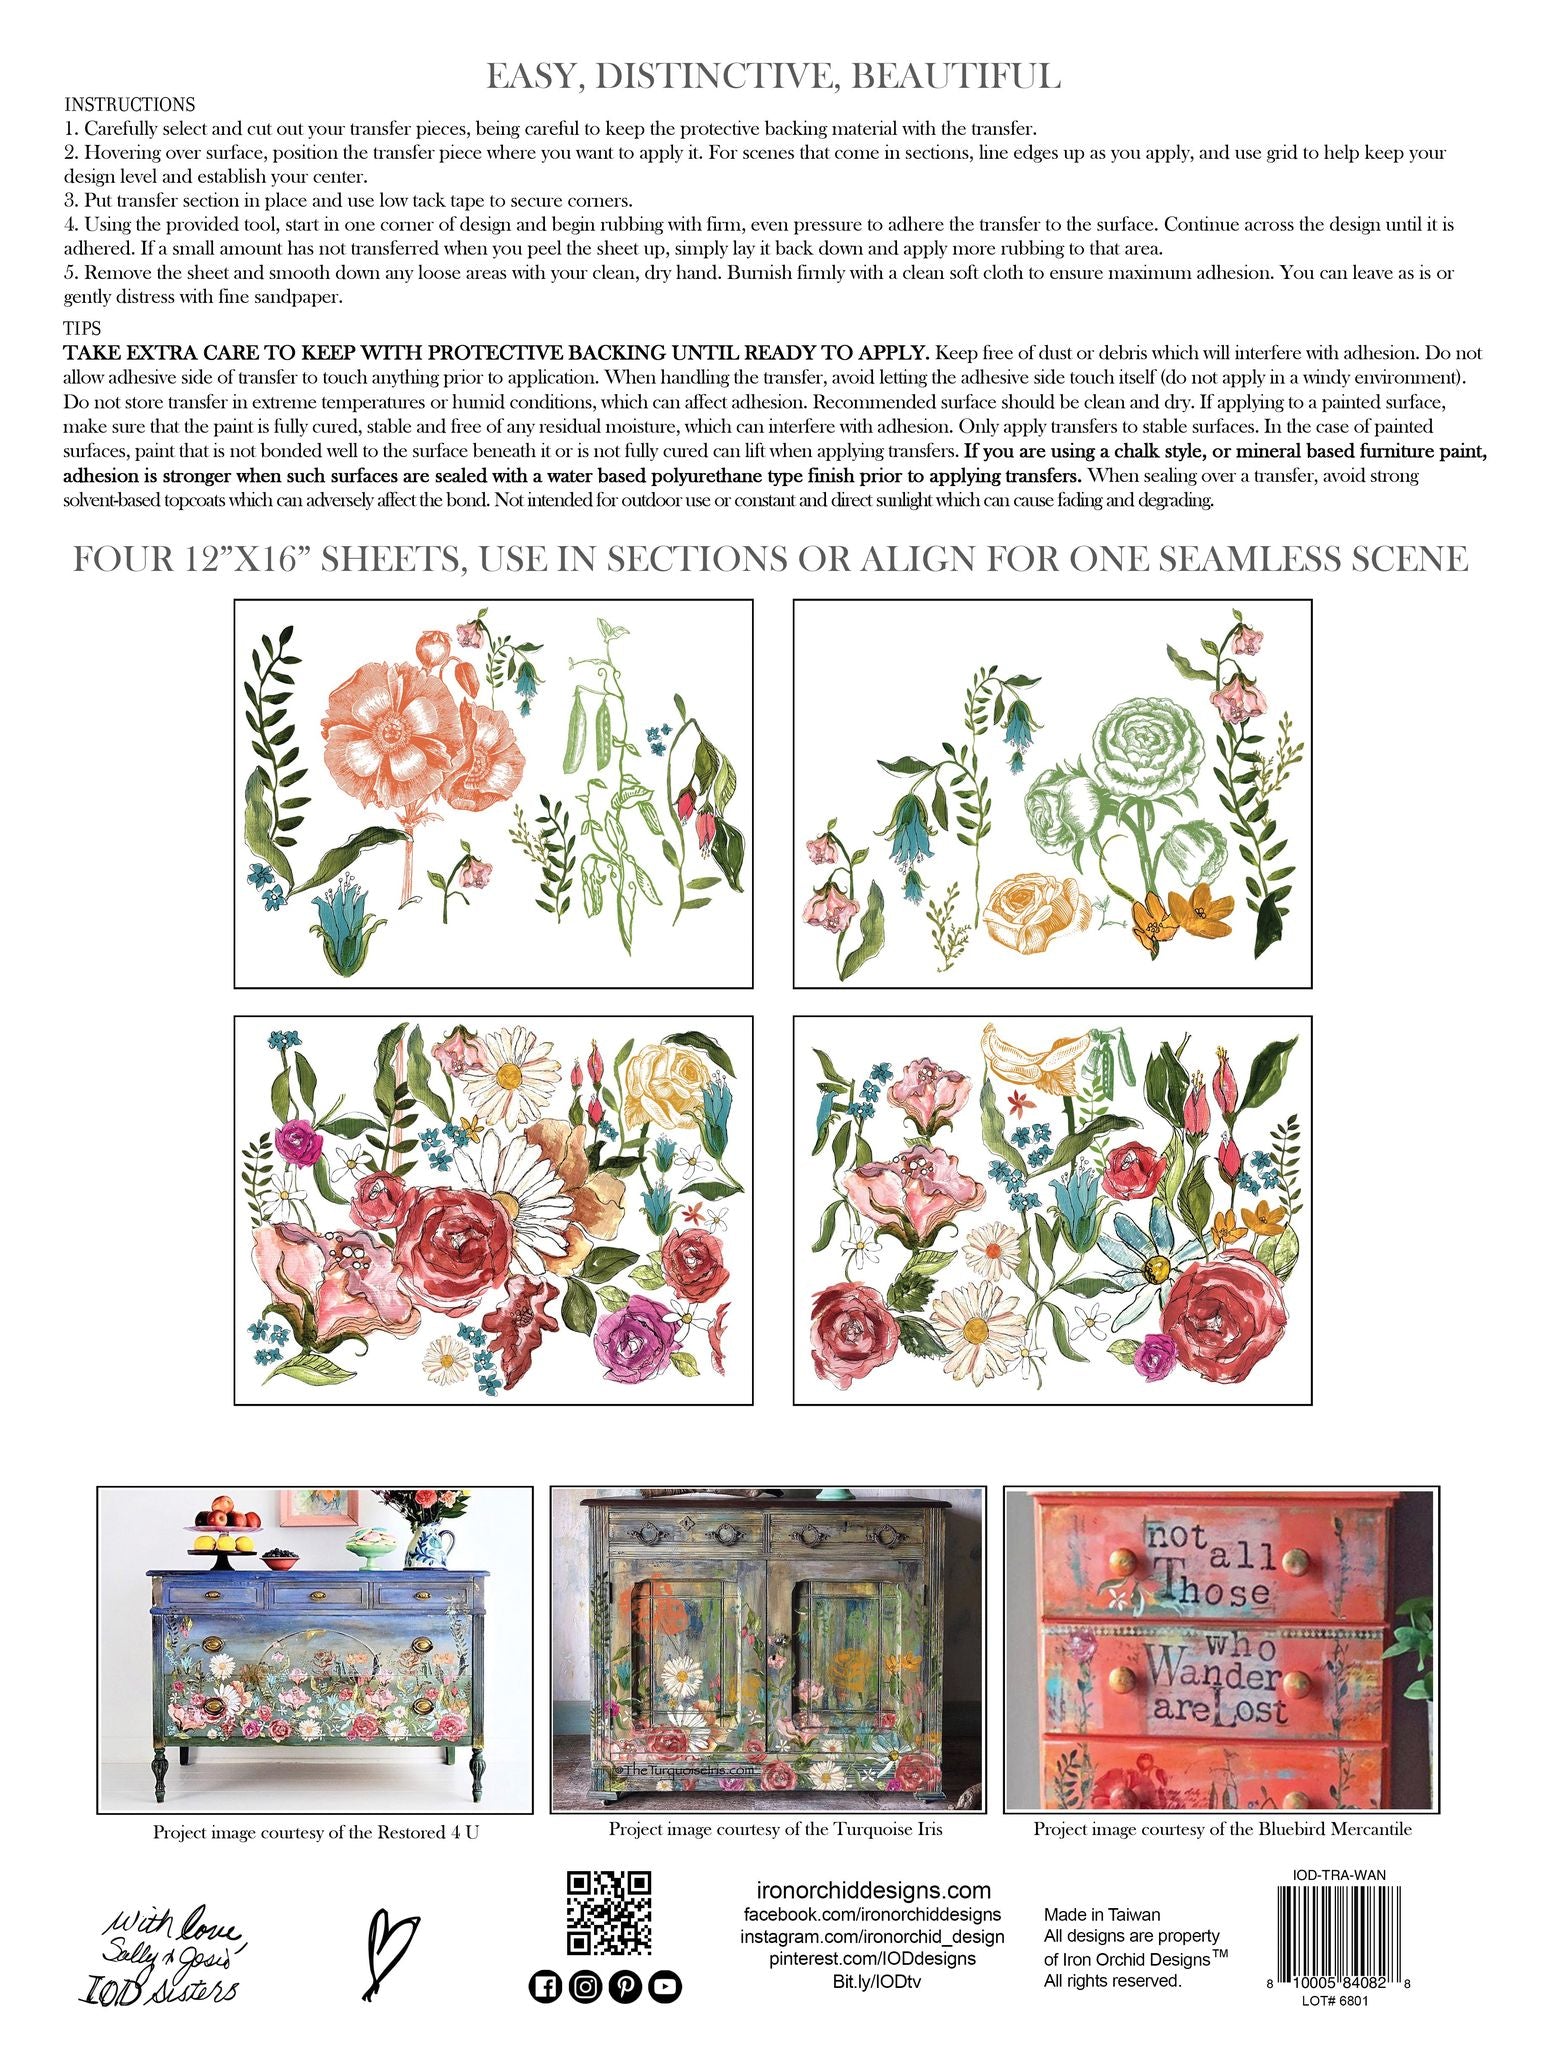 IOD Decorative Furniture Transfer May's Roses 12x16 Pad with 4 Sheets –  Goodson Vintage Treasures